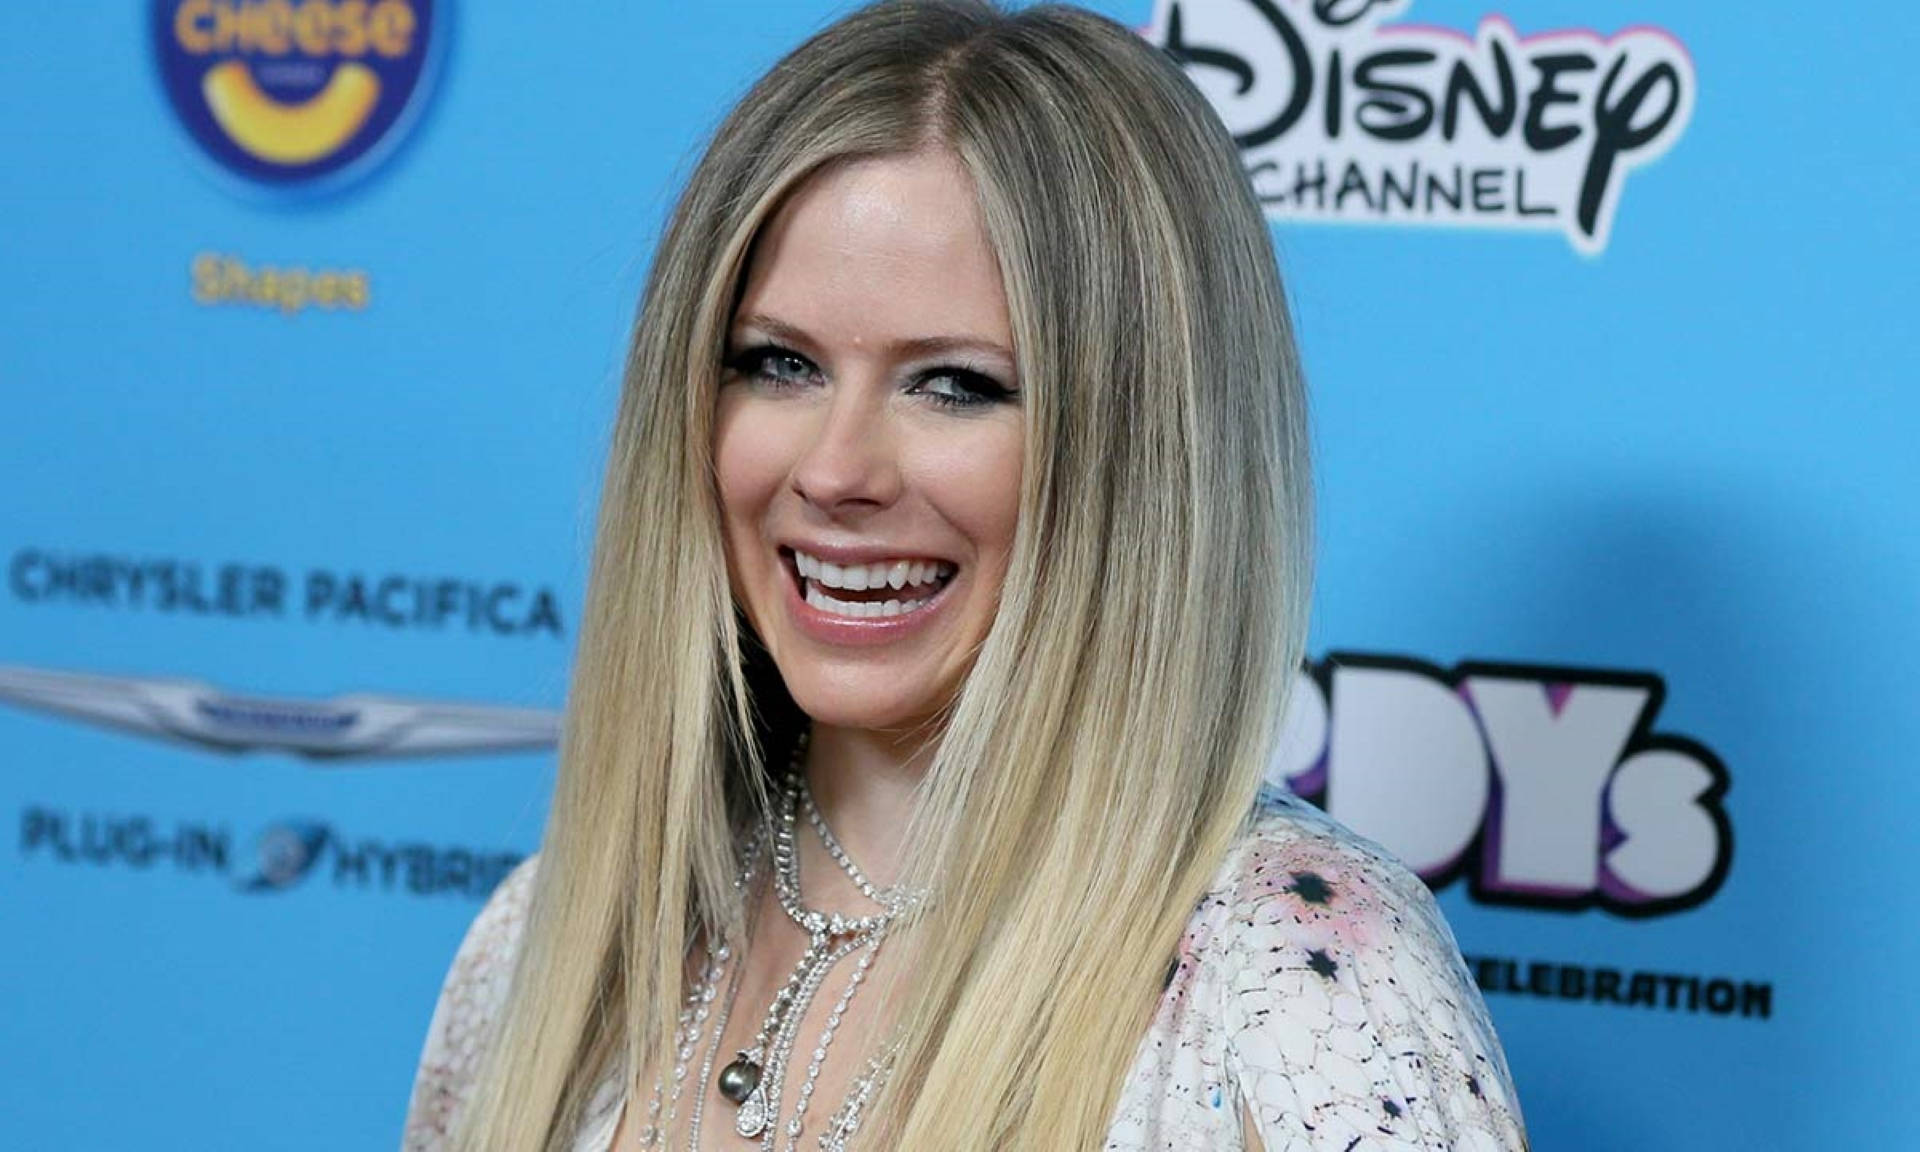 Caption: Avril Lavigne at the 2019 ARDYs Red Carpet Wallpaper